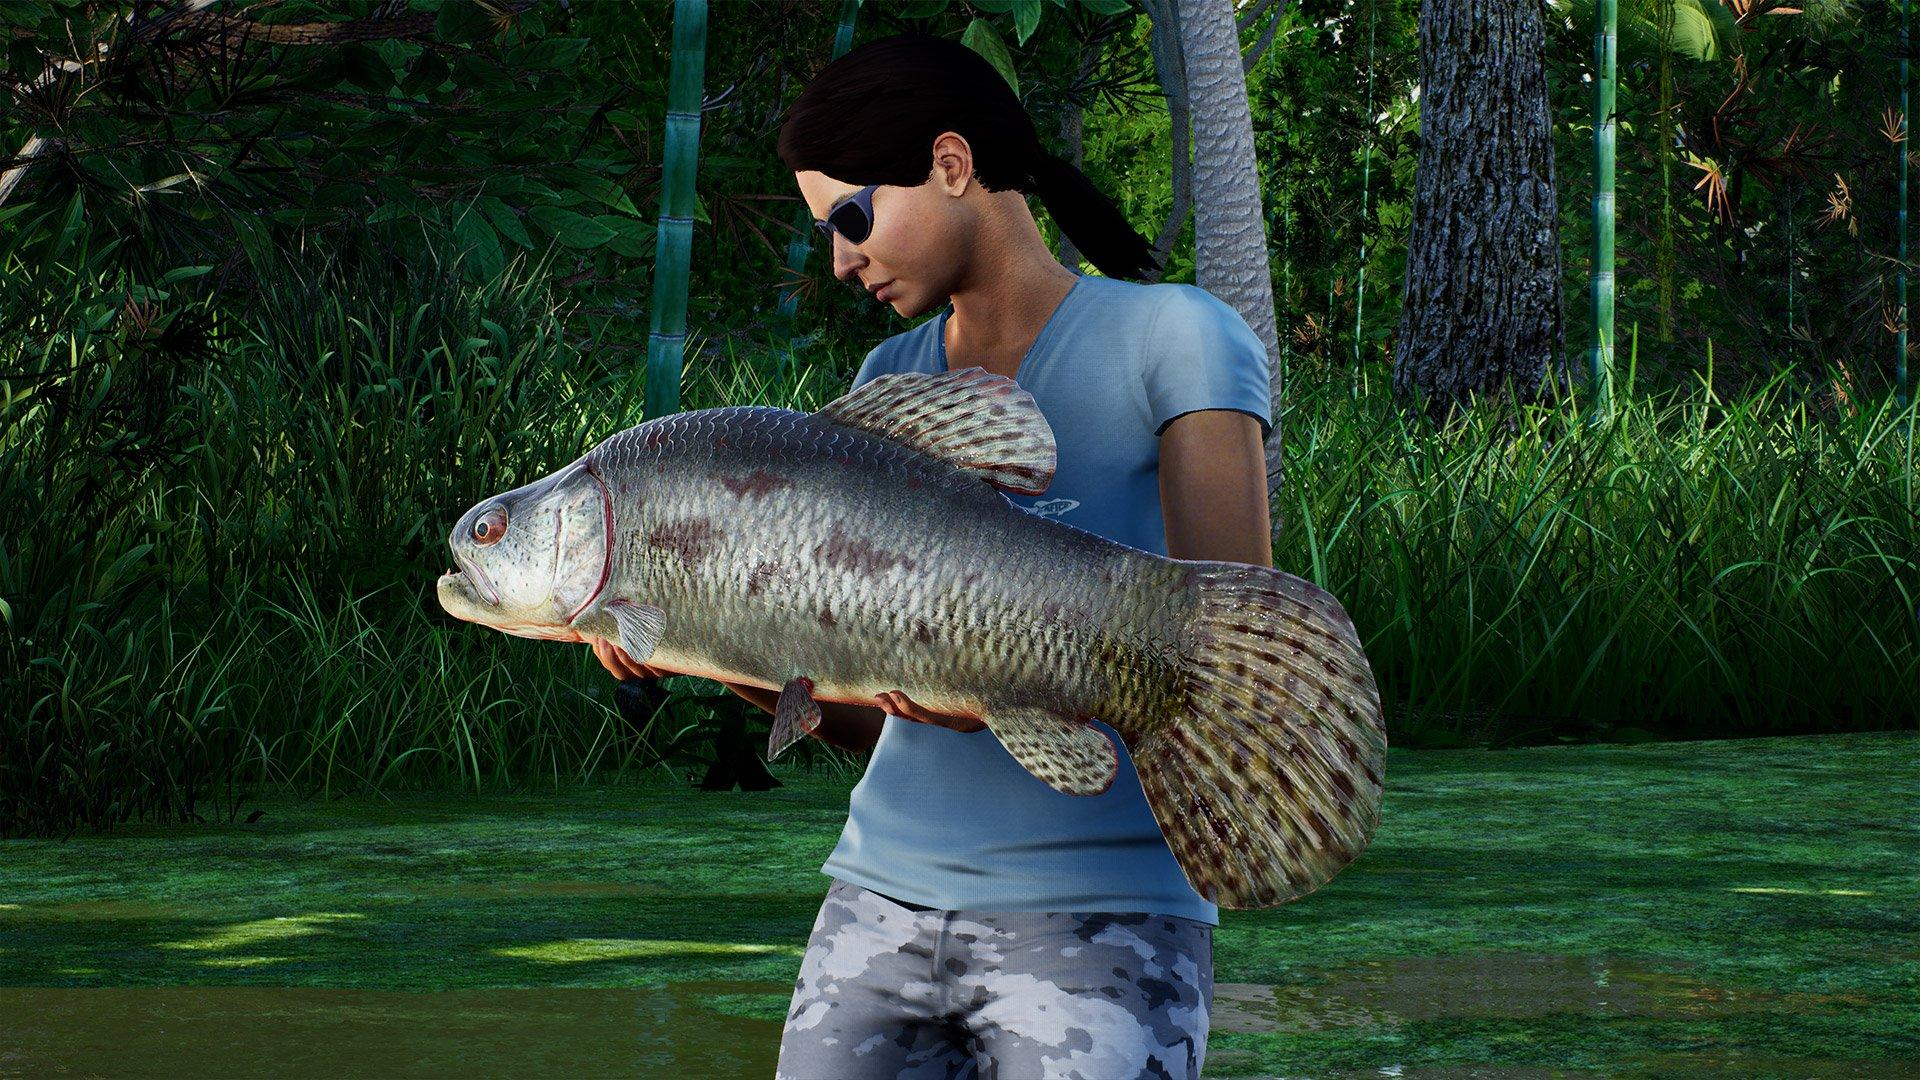 Fishing Sim World: Pro Tour Collector's Edition - Xbox One, Maximum Games